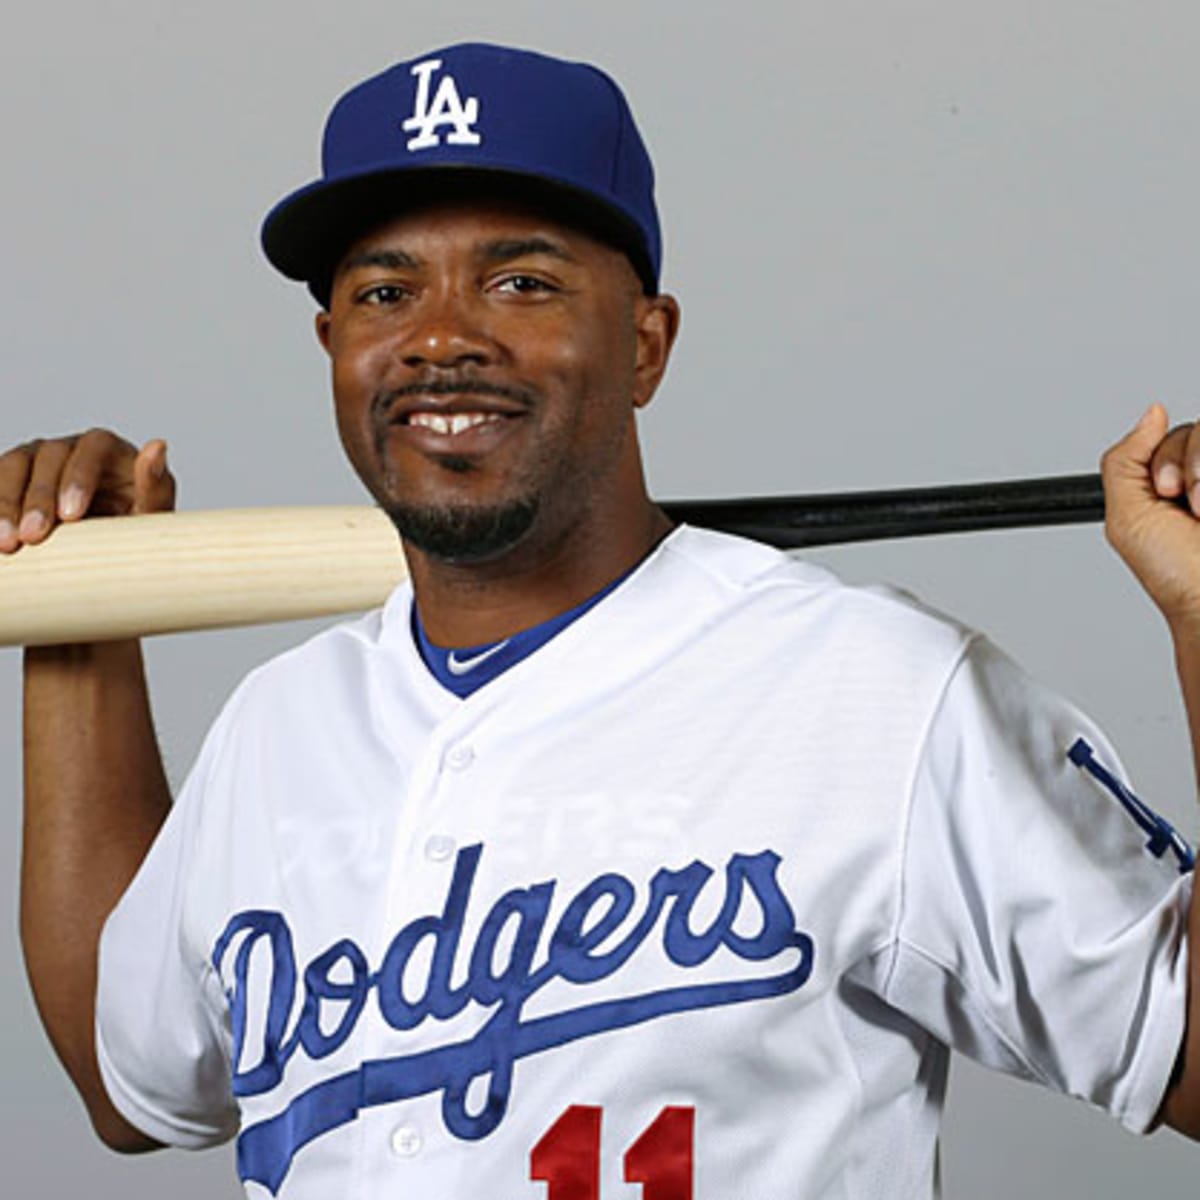 After one season with the Dodgers, Jimmy Rollins promoted to